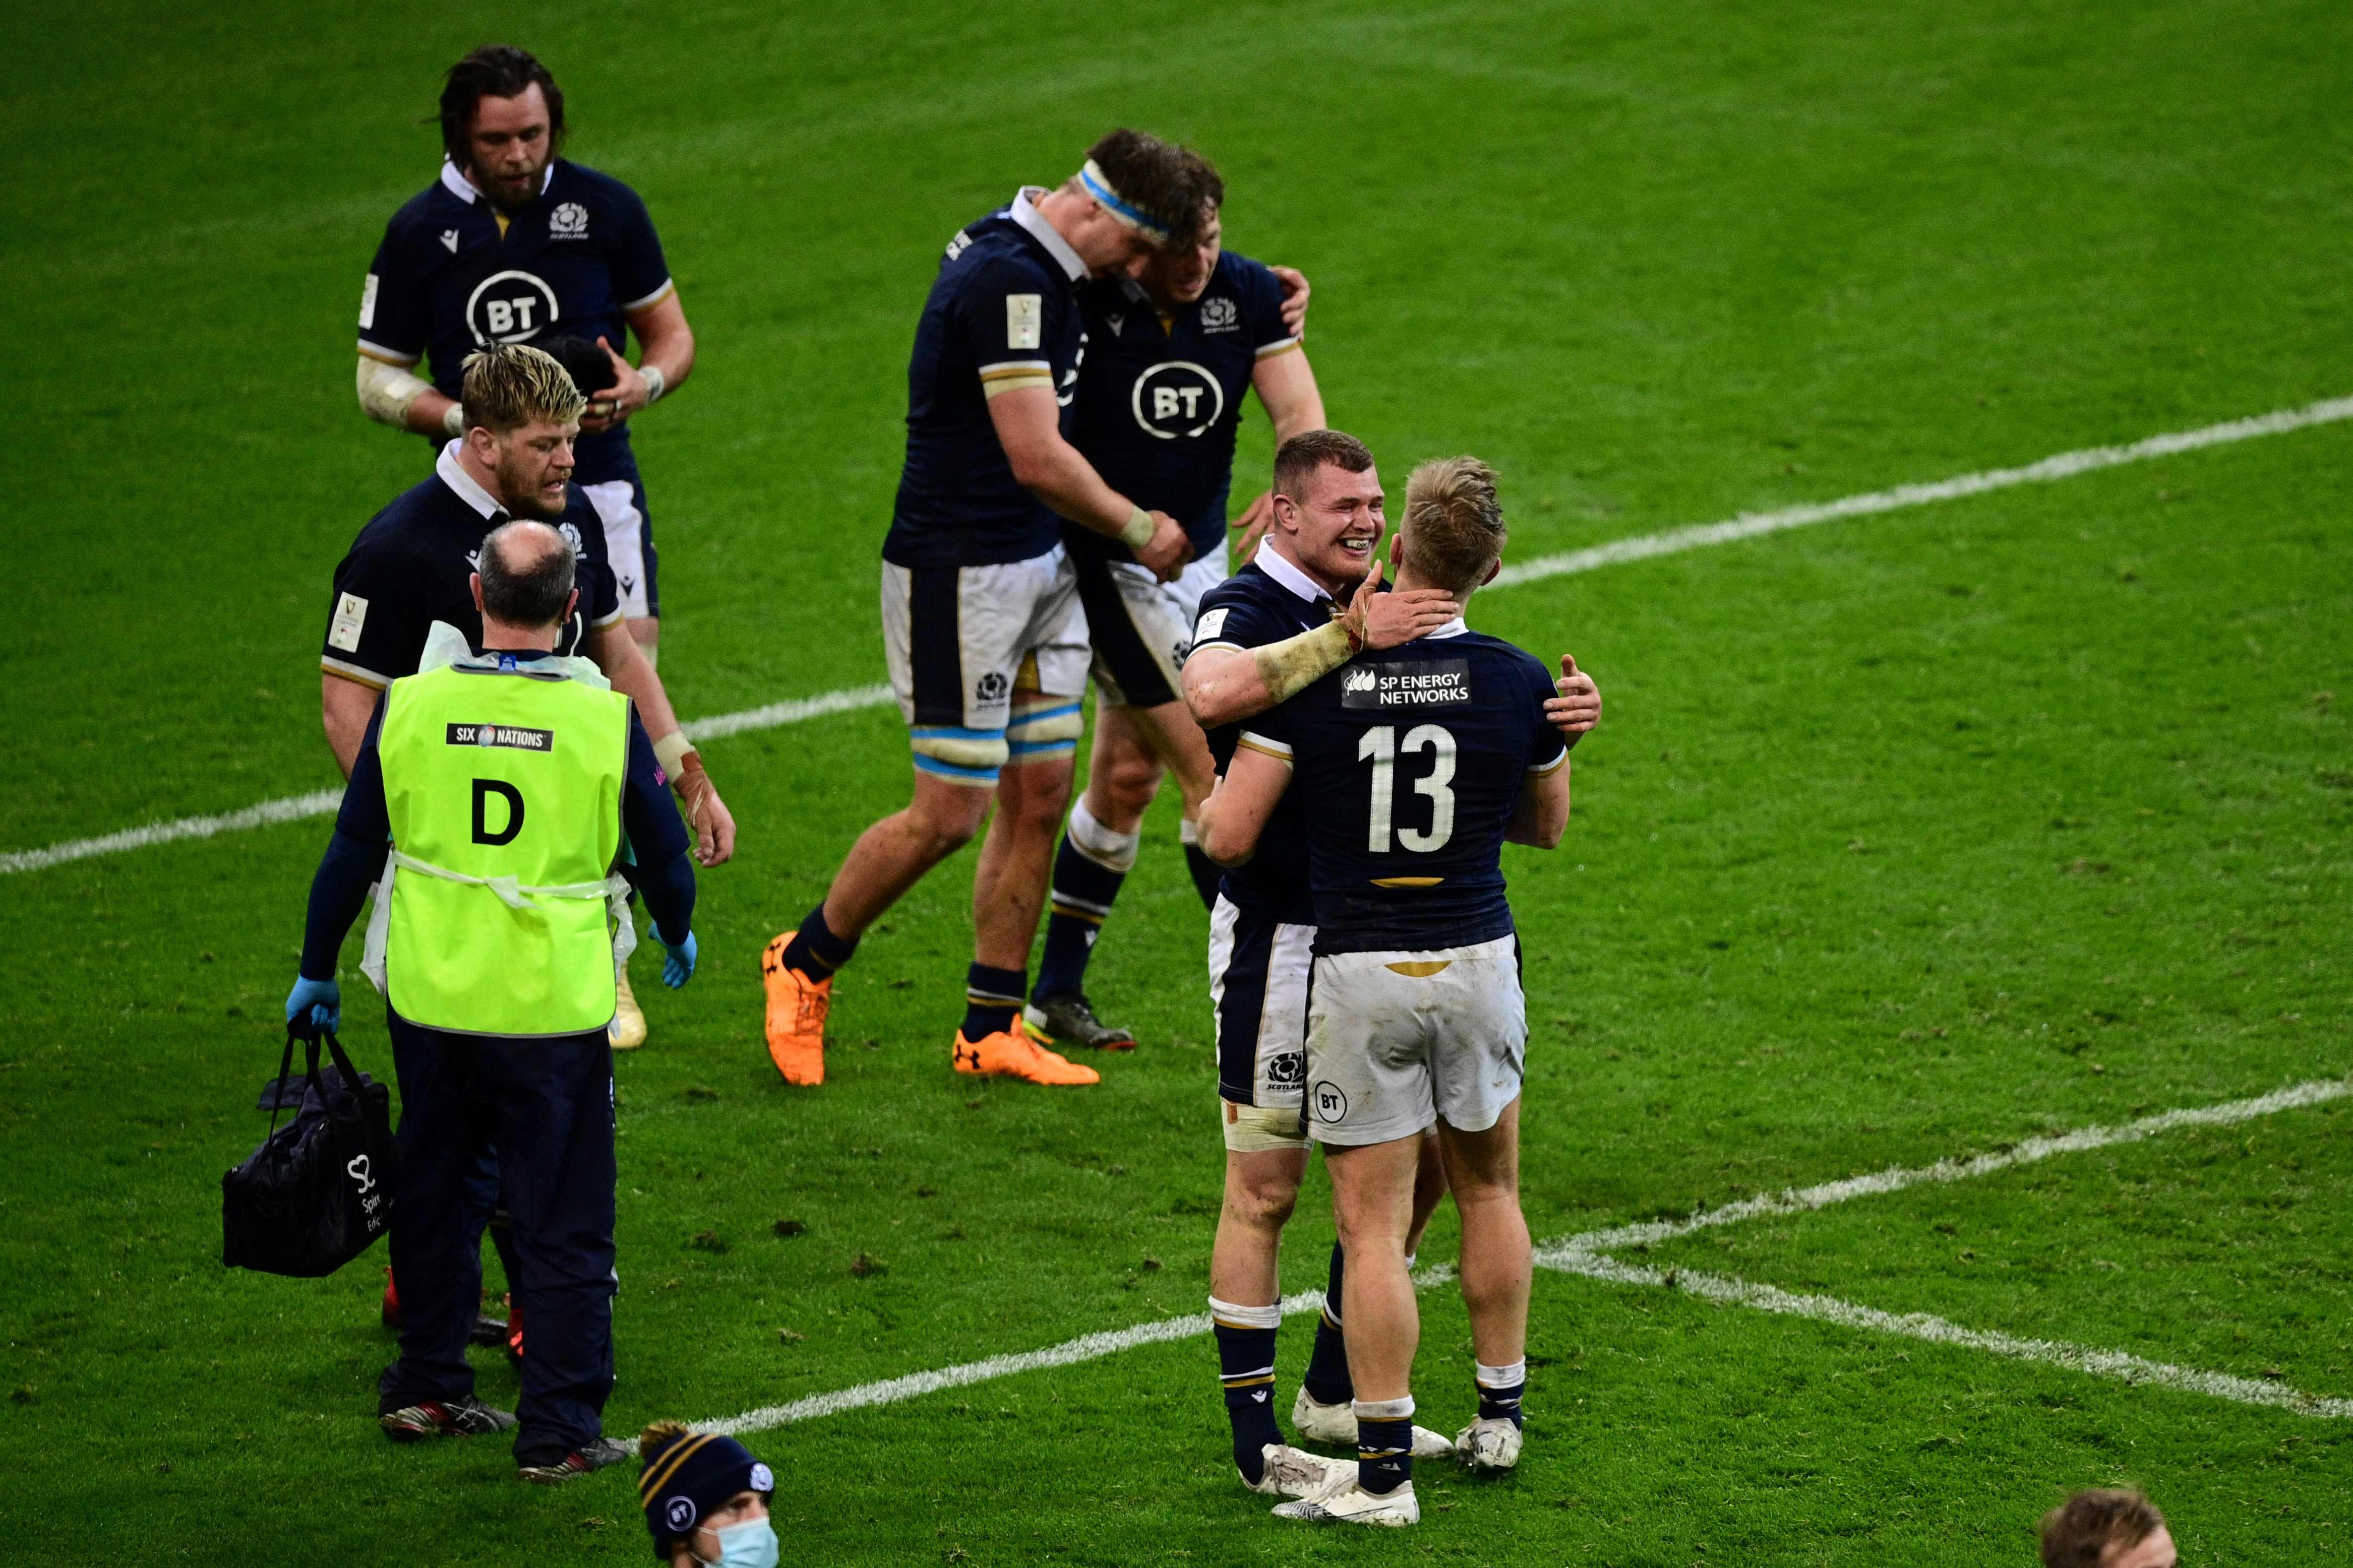 Scotland celebrate after their last-gasp try